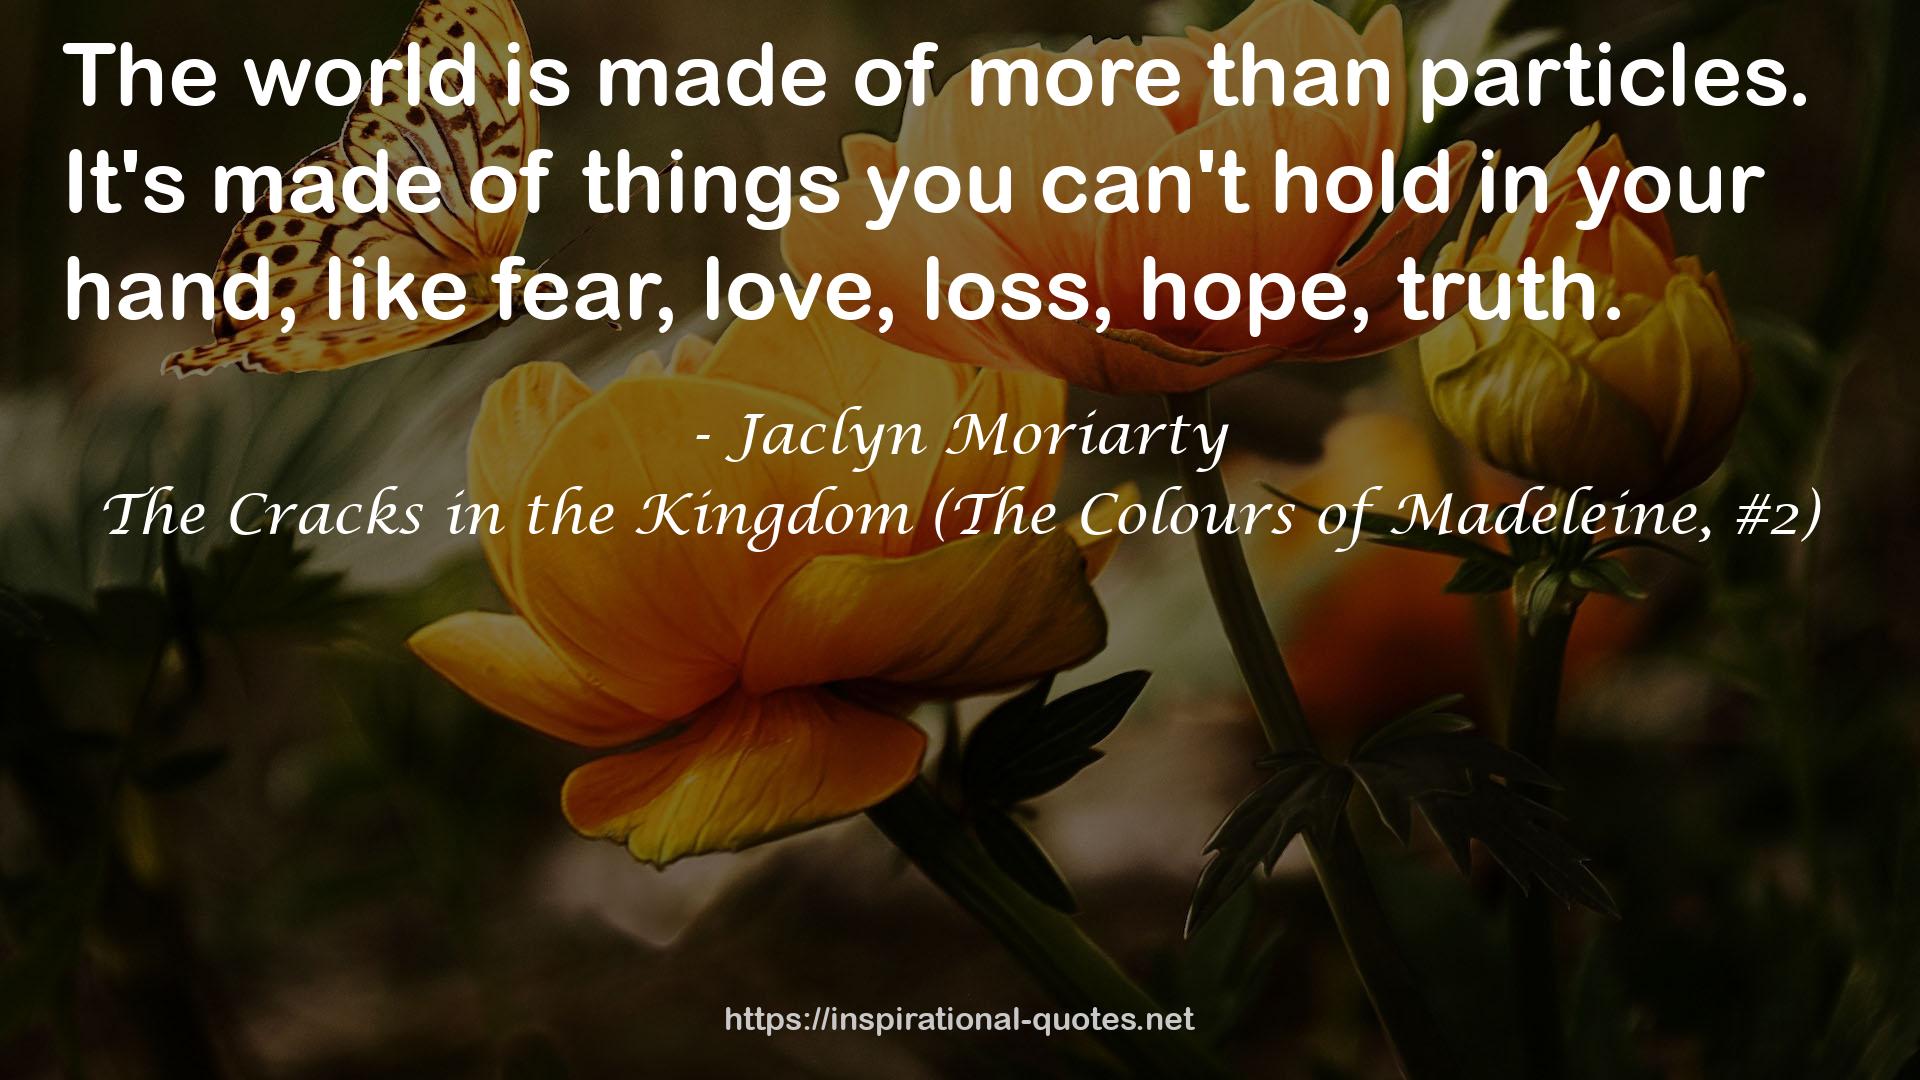 The Cracks in the Kingdom (The Colours of Madeleine, #2) QUOTES